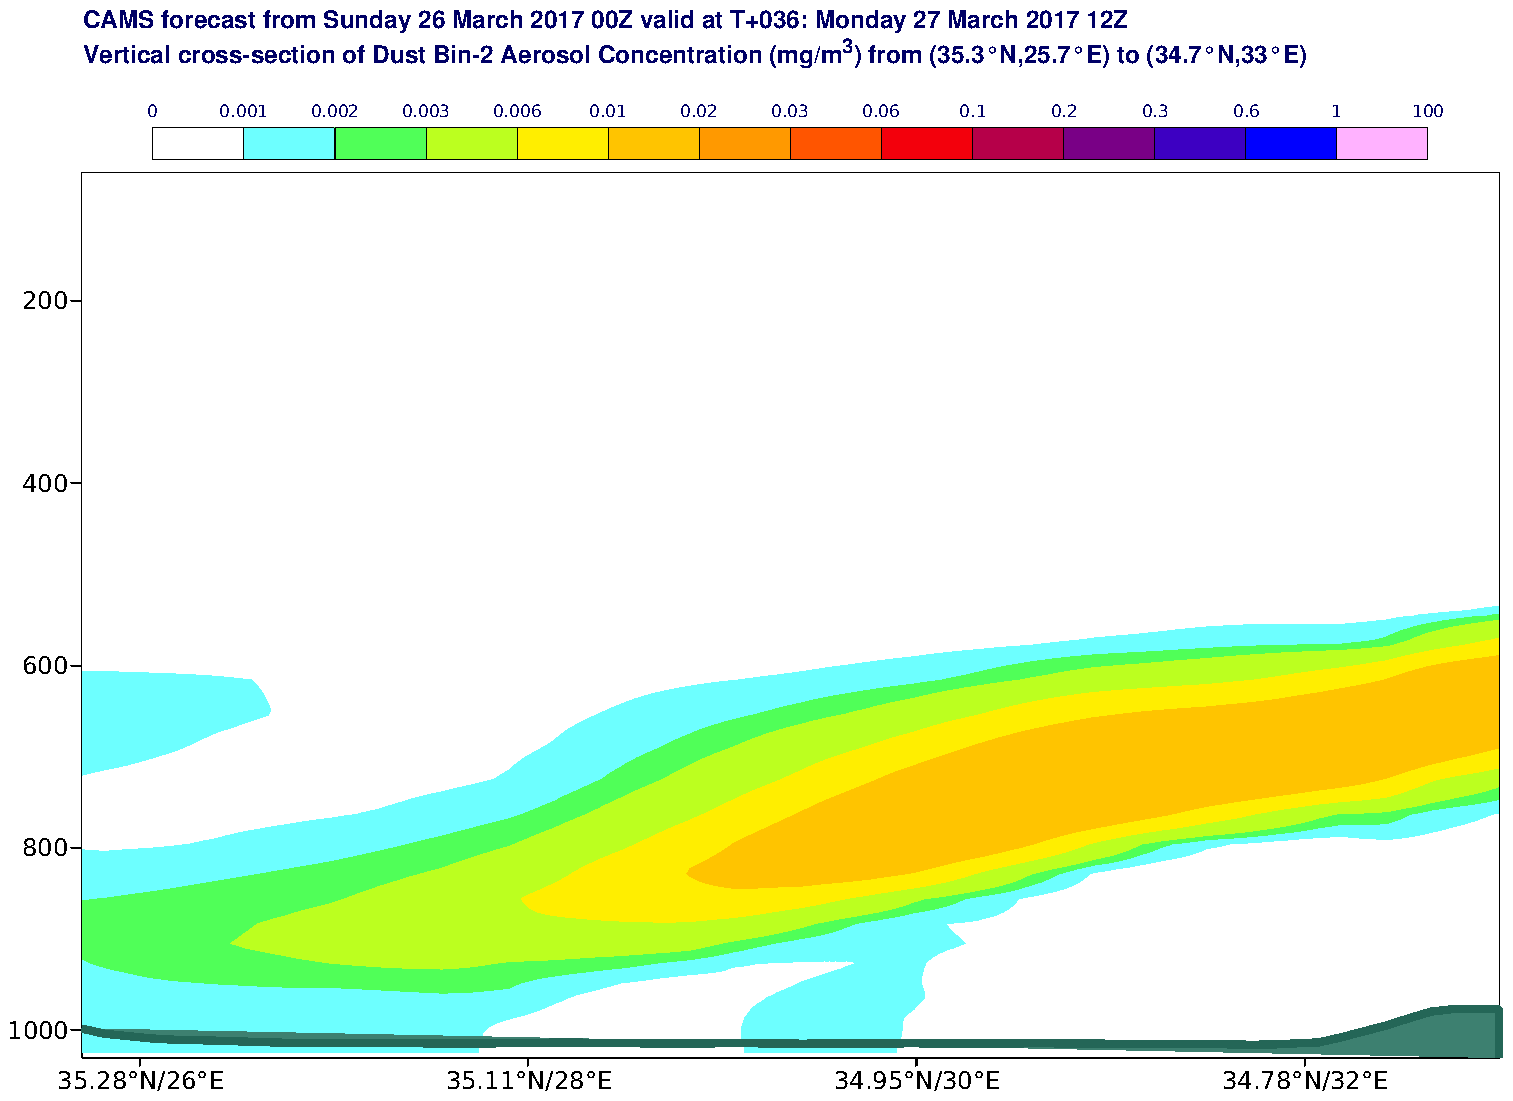 Vertical cross-section of Dust Bin-2 Aerosol Concentration (mg/m3) valid at T36 - 2017-03-27 12:00